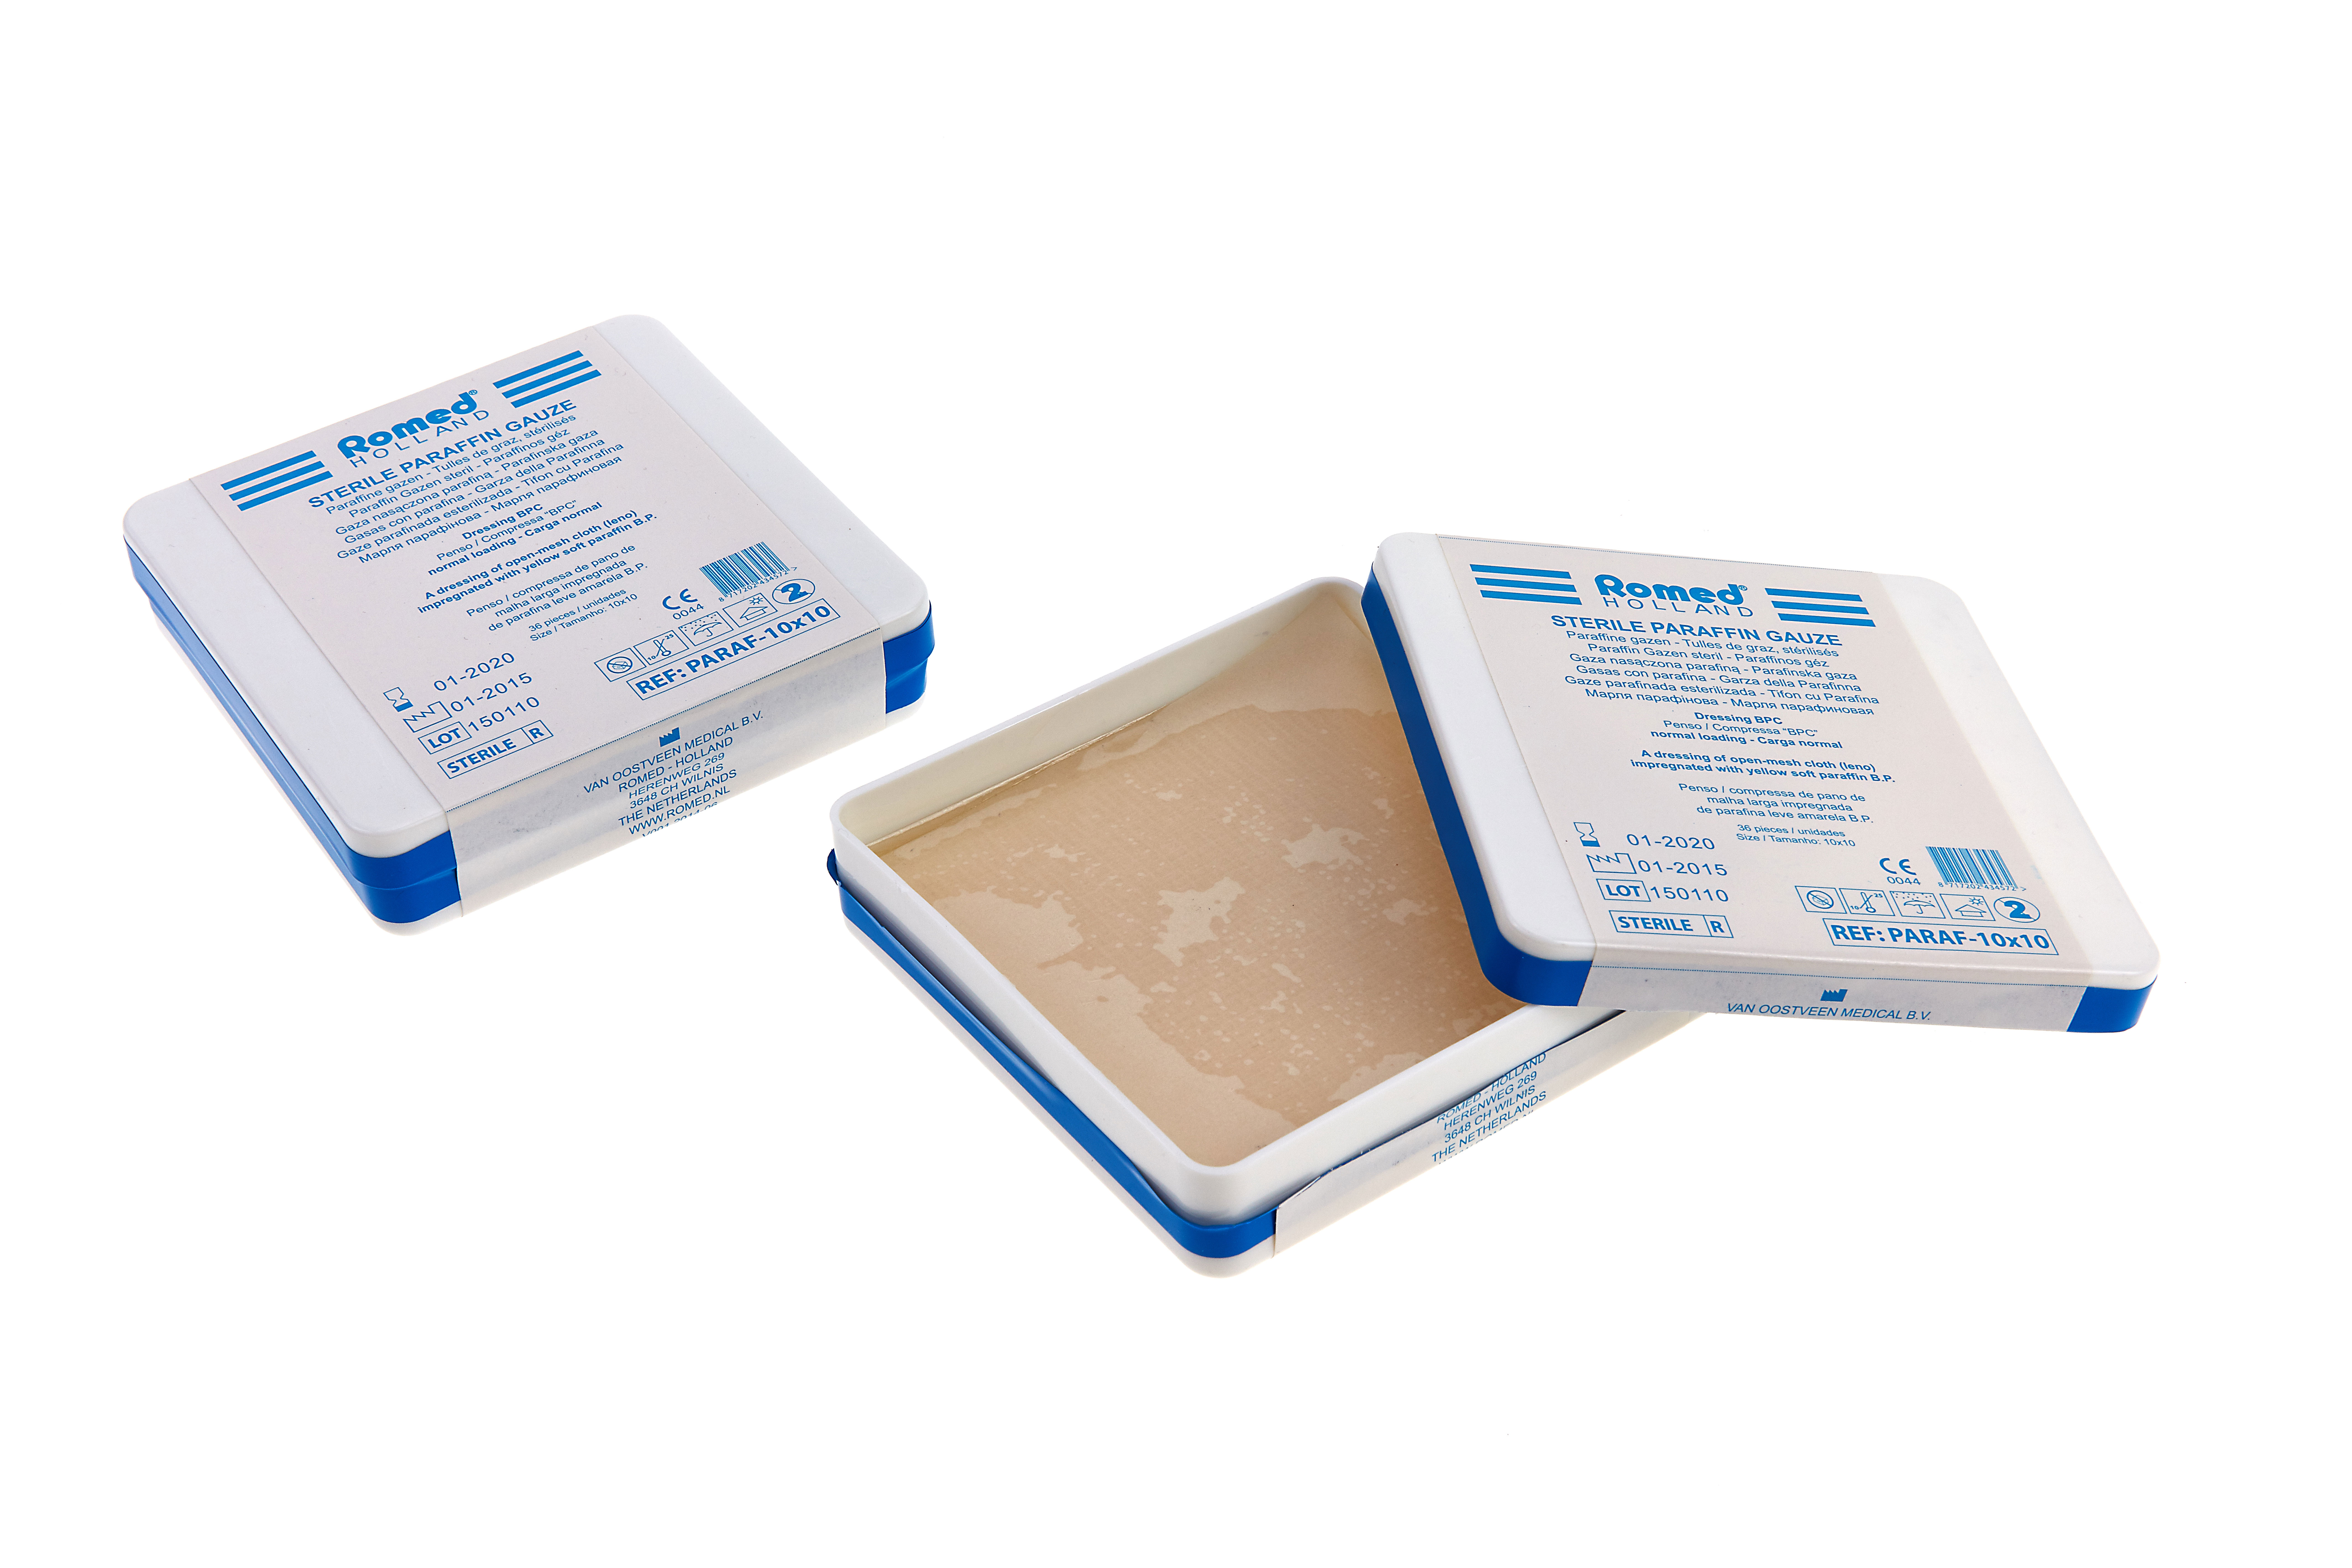 PARAF-10X10 Romed paraffine gauze 10x10cm, sterile, per 36 pcs in a container, 4 containers in an innerbox, 9 x 4 containers = 36 containers in a carton.